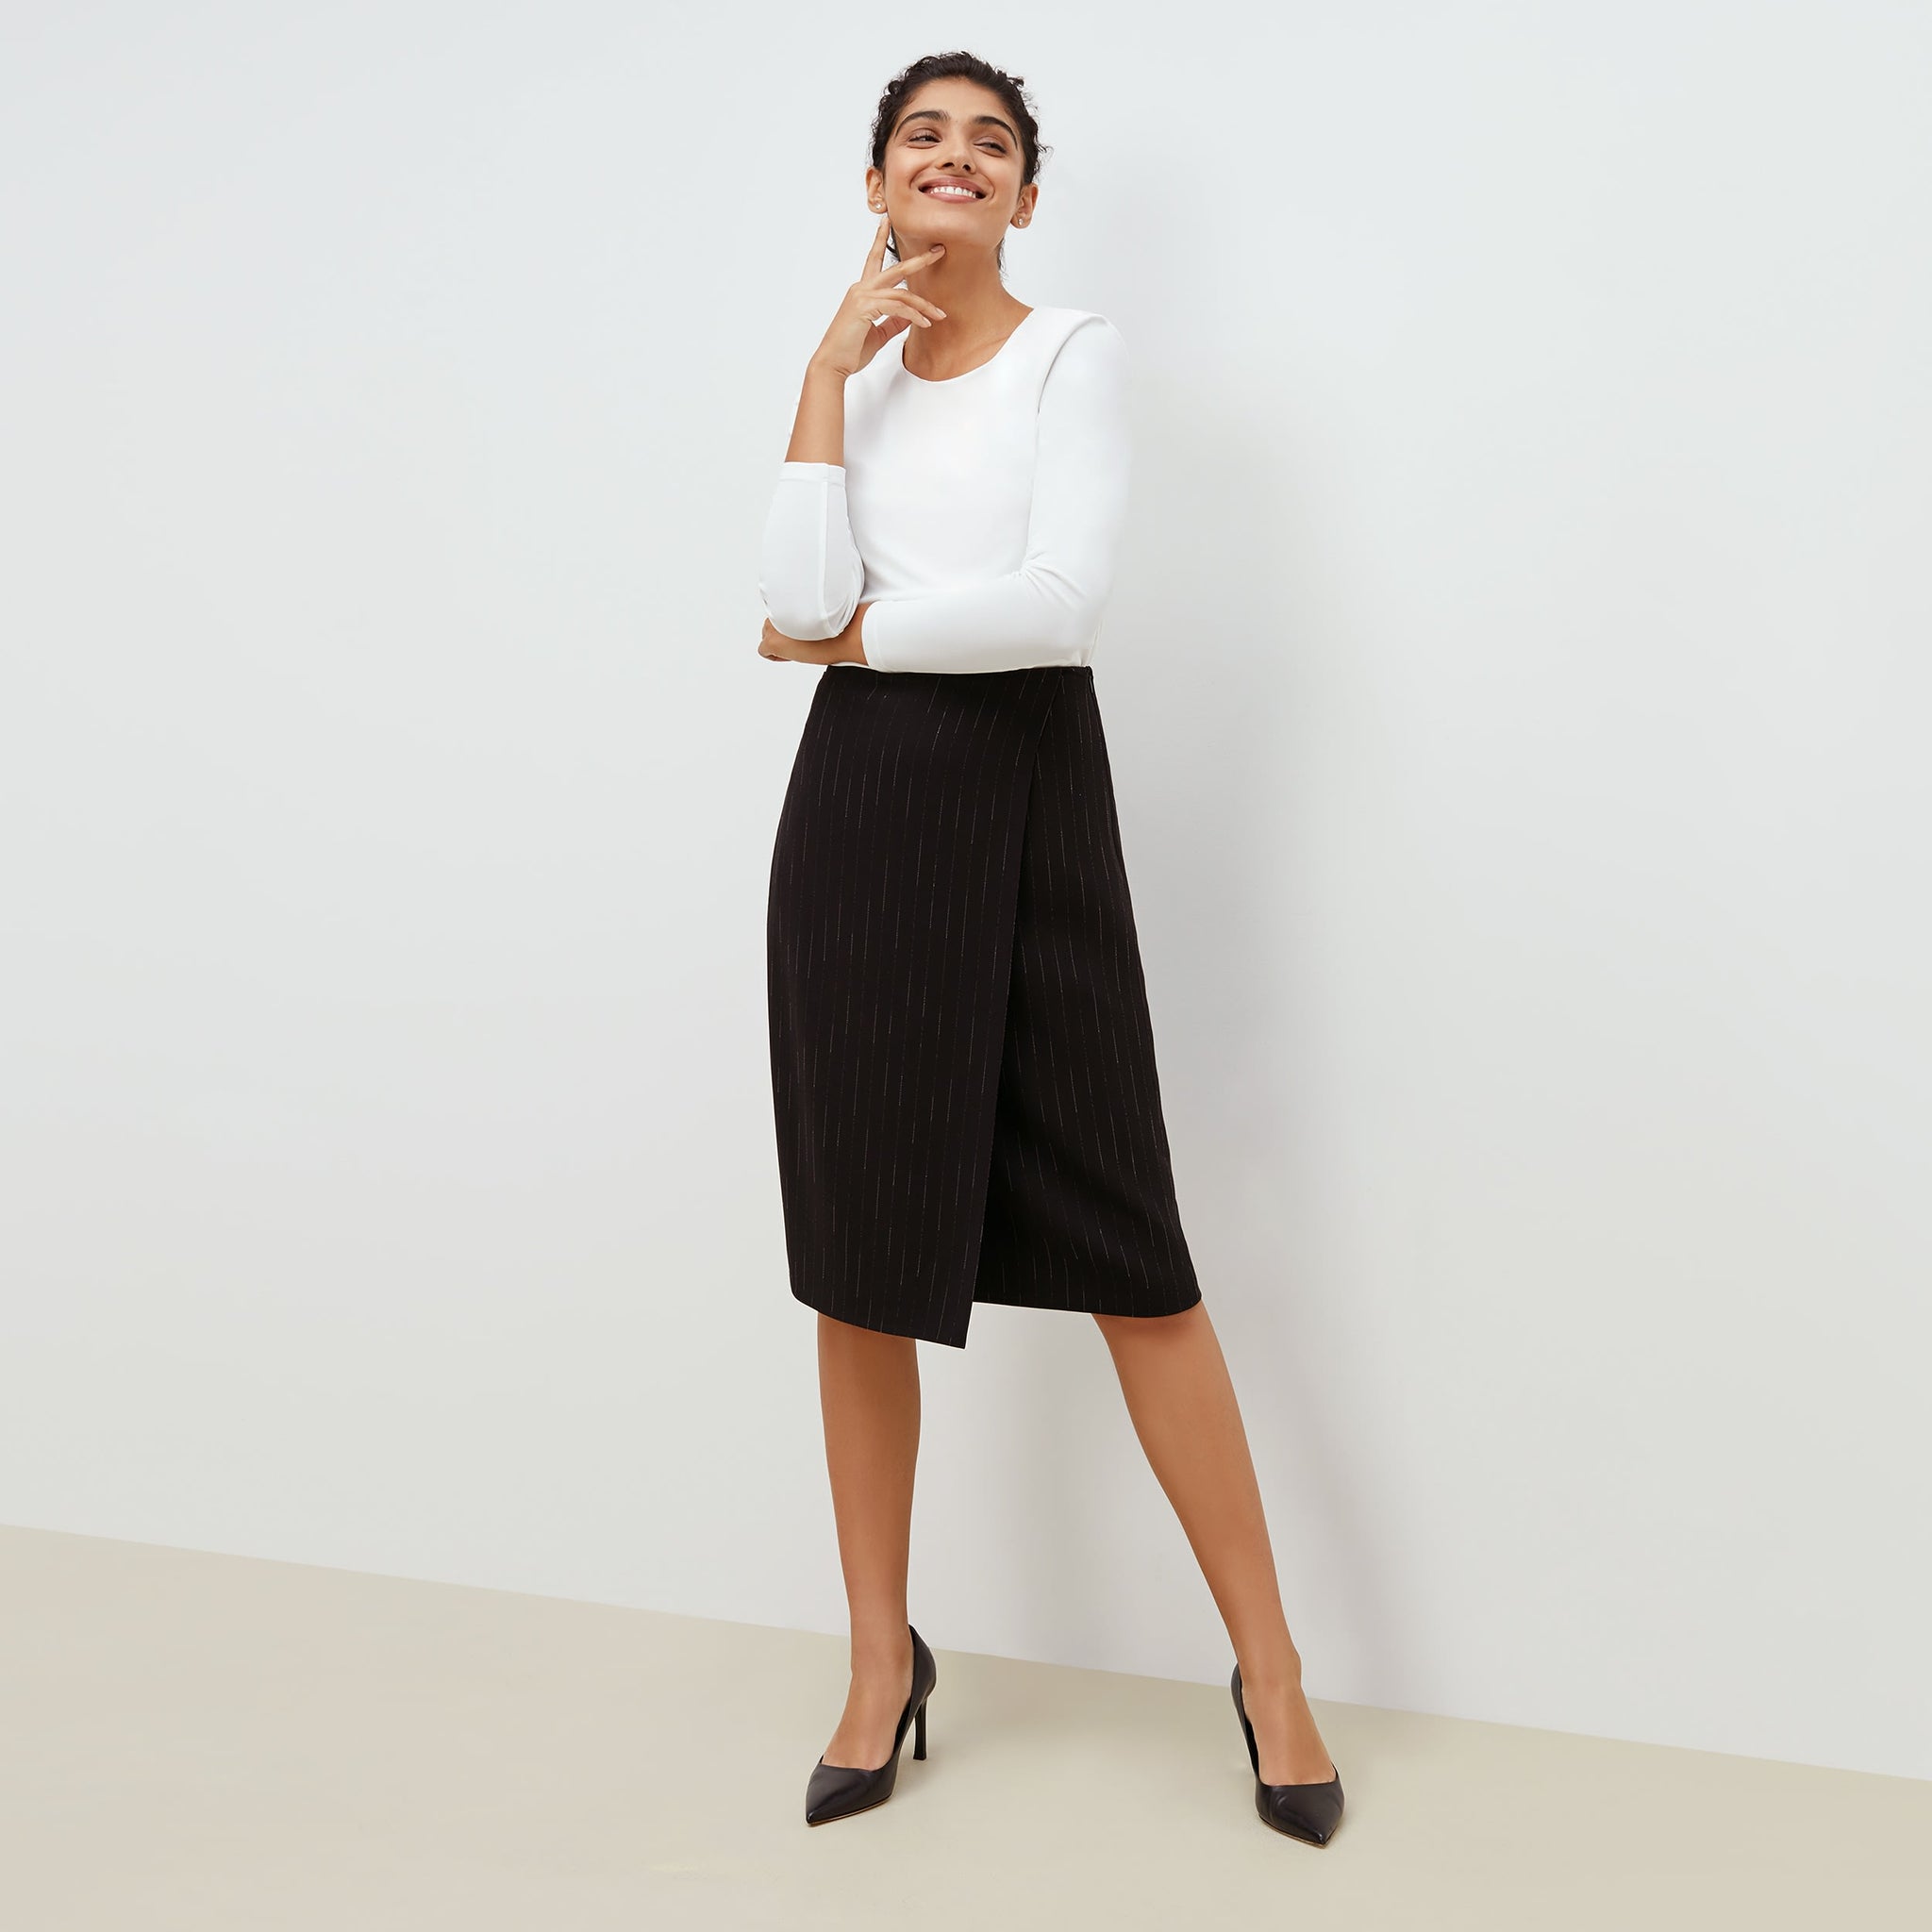 Front image of a woman standing wearing the Logan Skirt in black